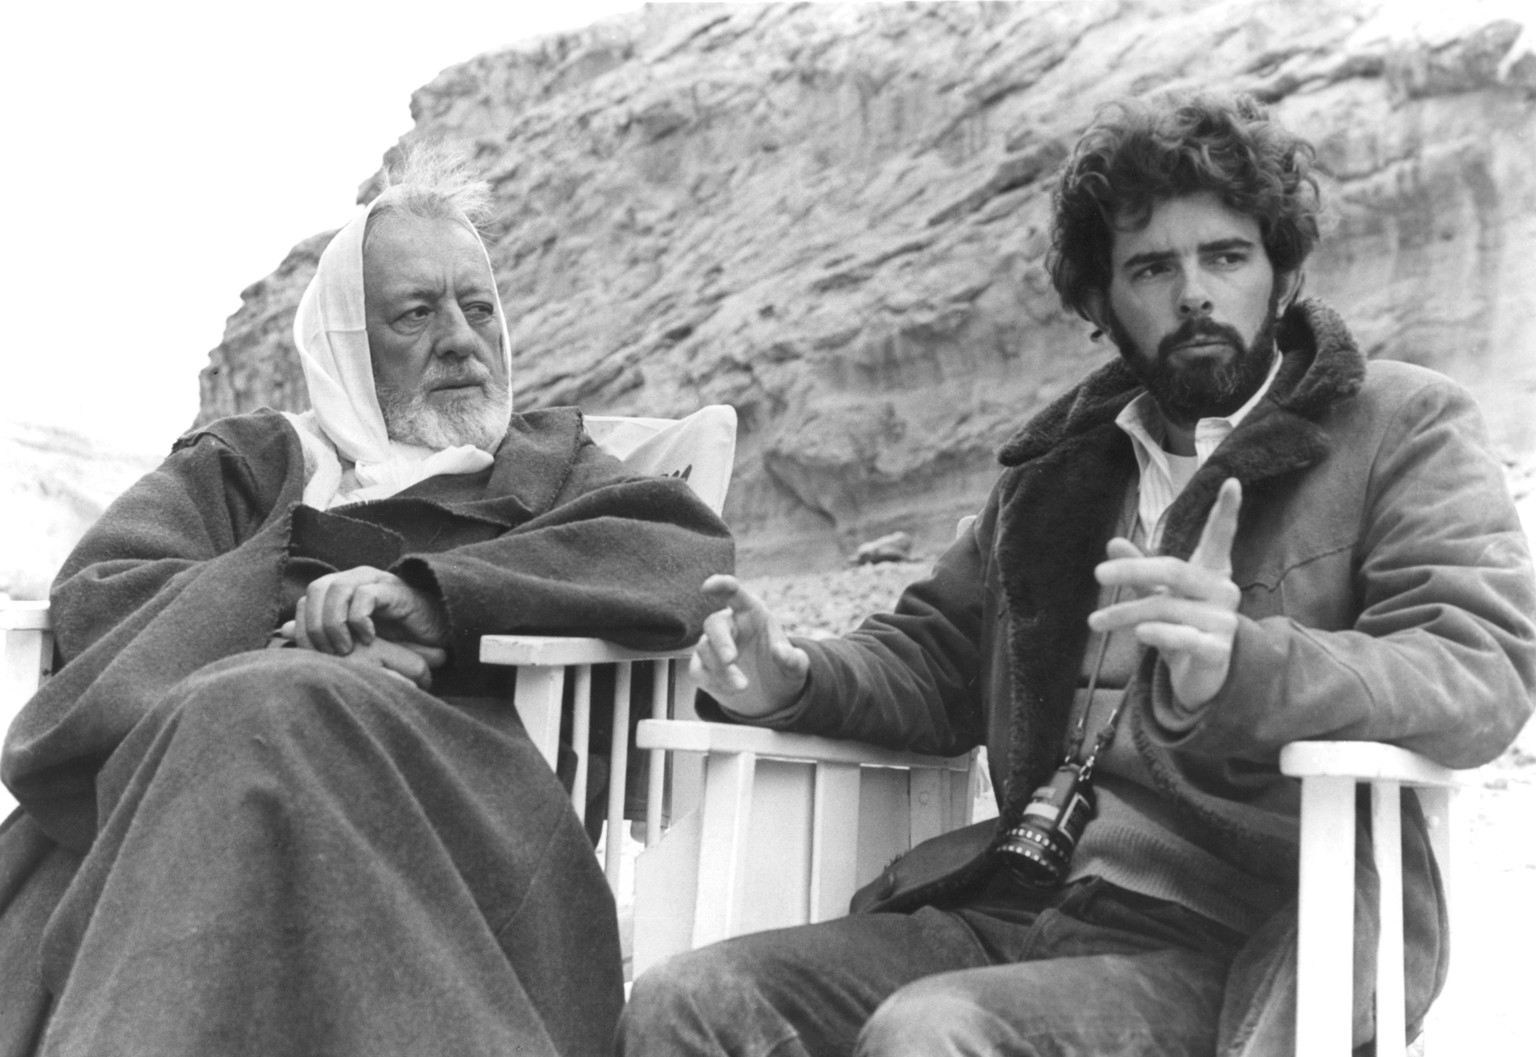 On the set of Star Wars: Episode IV - A New Hope
British actor Alec Guinness with American director, screenwriter and producer George Lucas on the set of his movie Star Wars: Episode IV - A New Hope.  ...